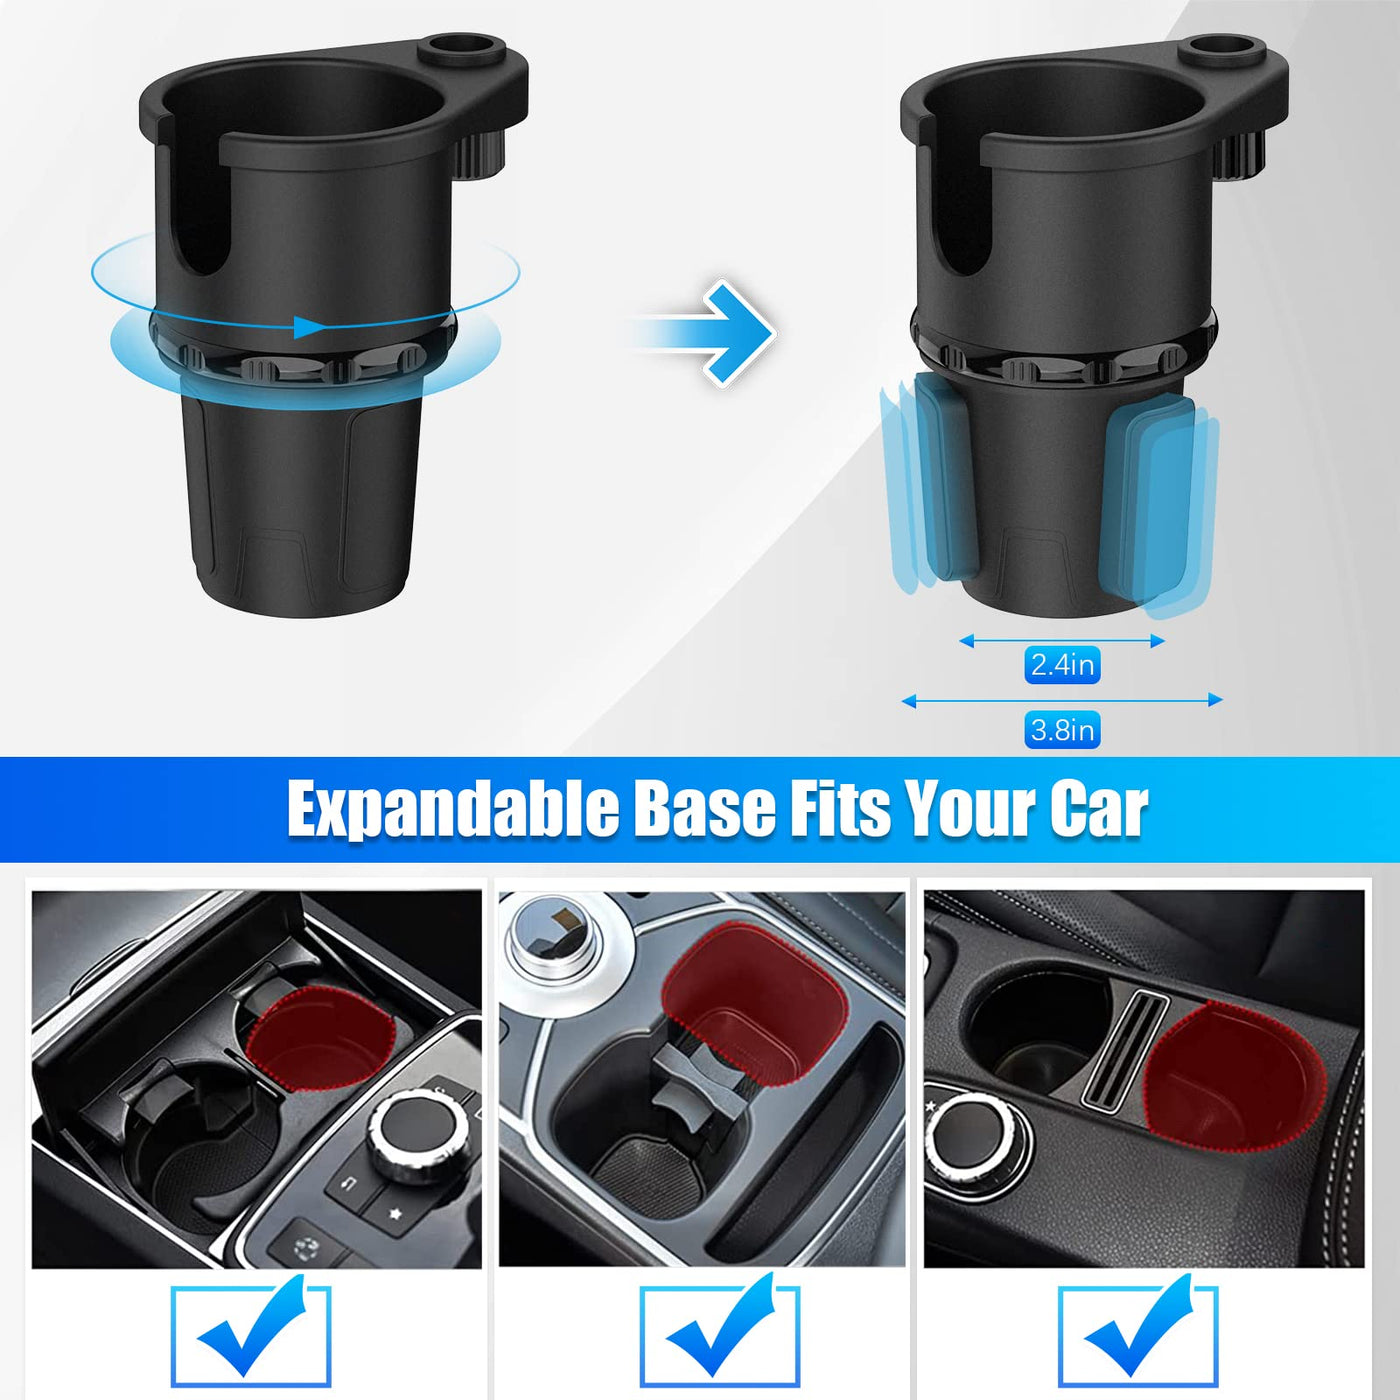 OUTXE Car Cup Holder Expander+Phone Mount+Food Tray, 3-in-1 Extra Cuph